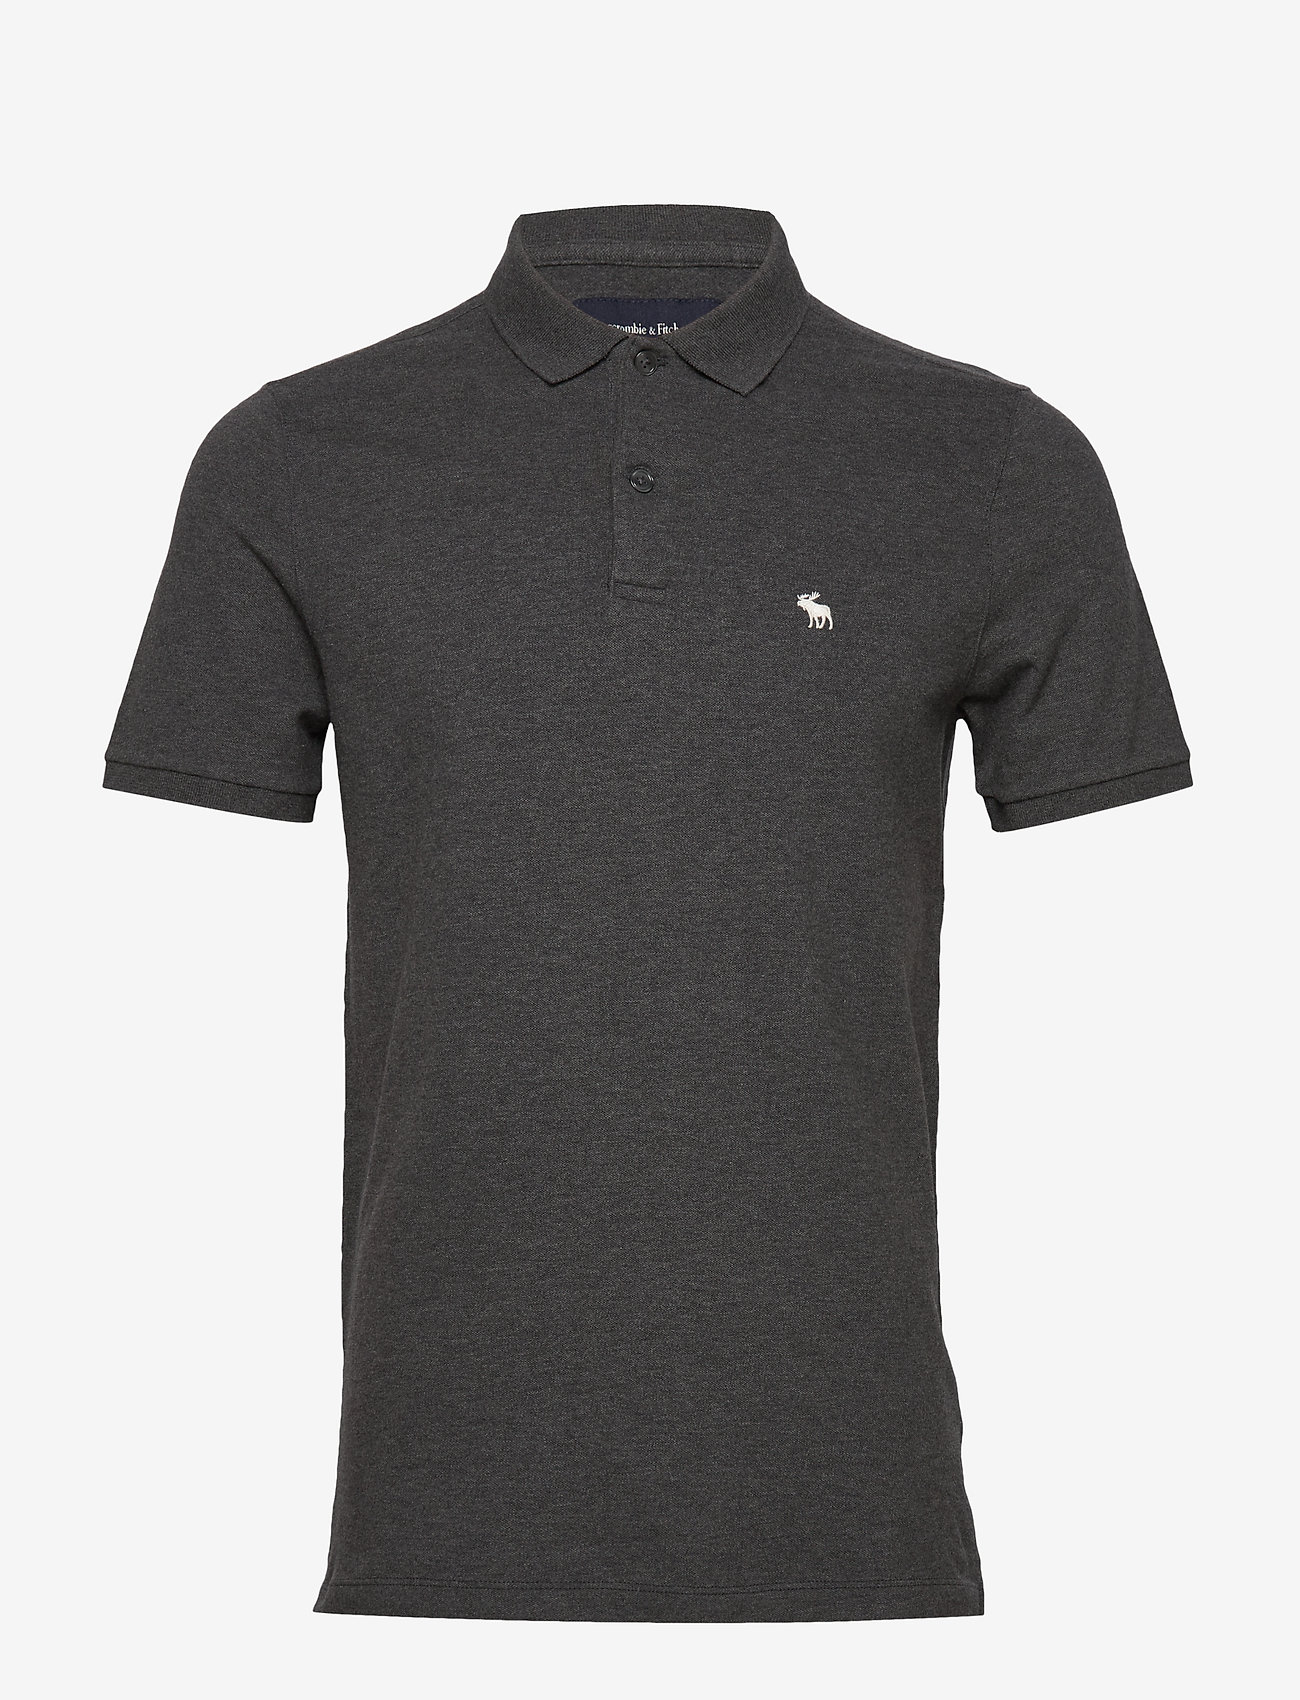 abercrombie and fitch polos